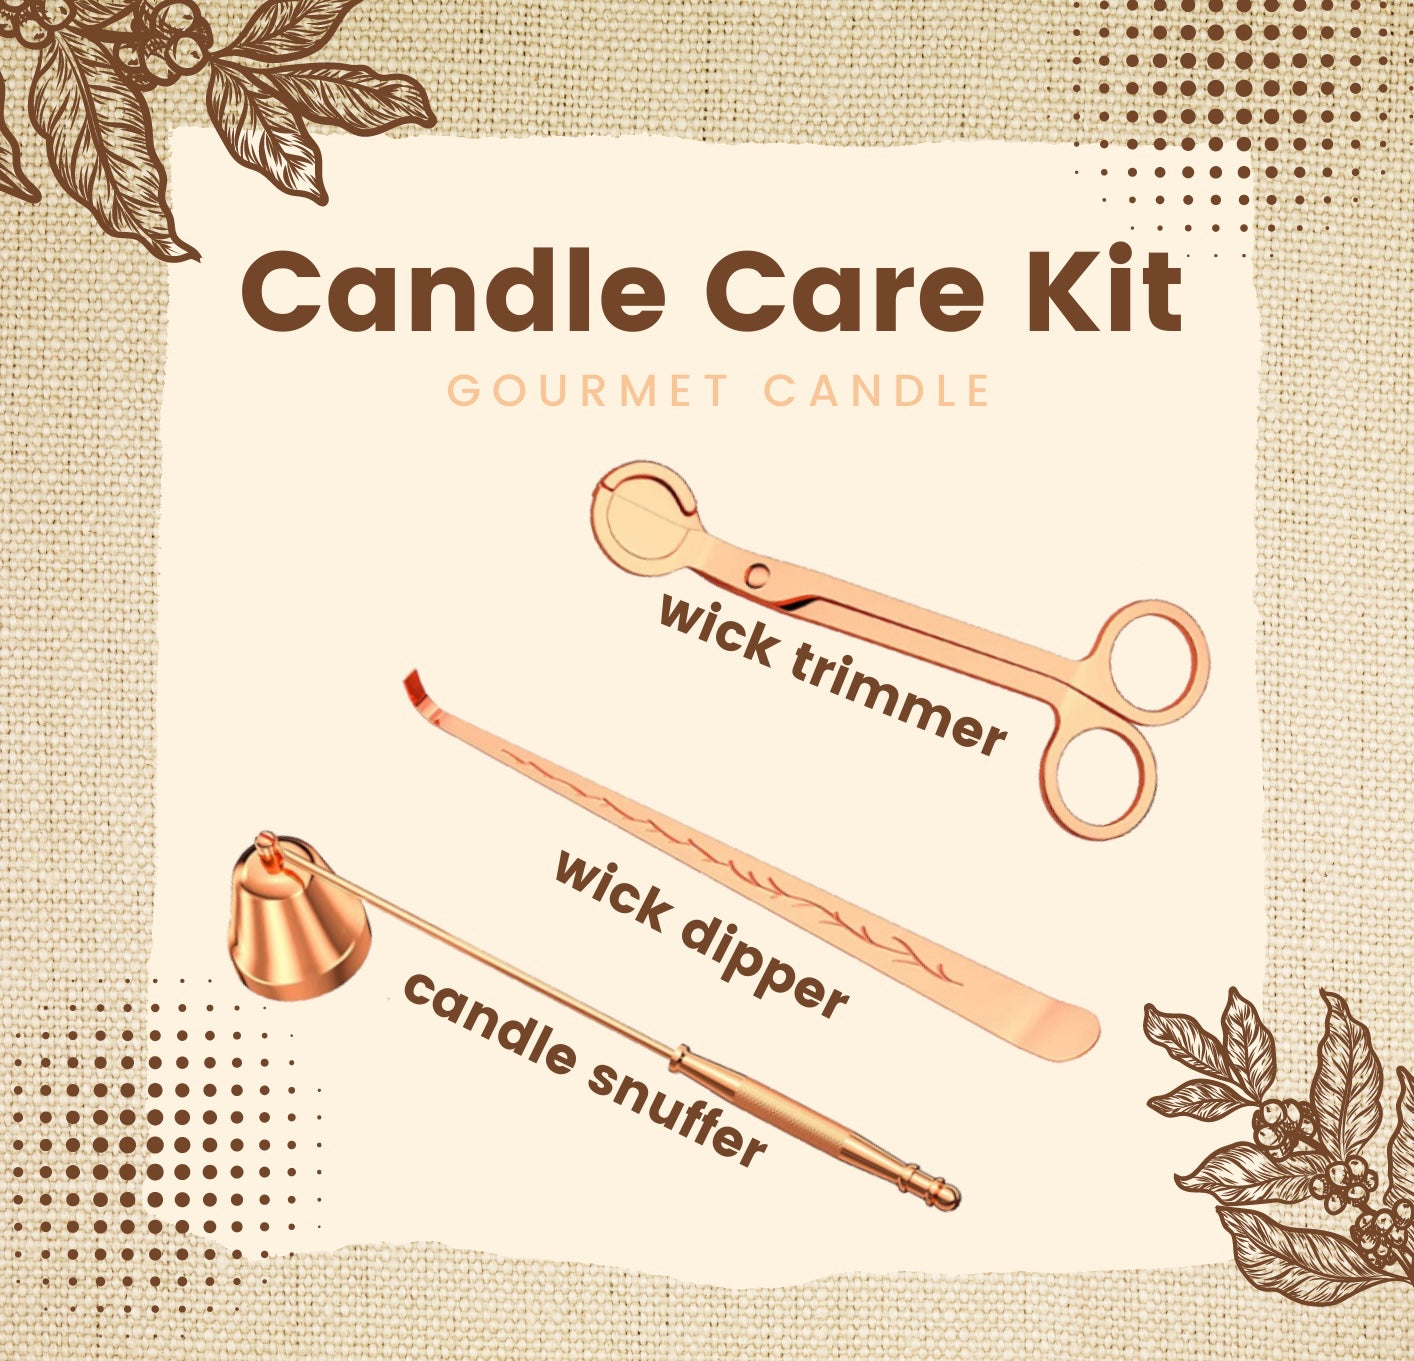 Candle Care Set of Tools for proper candle care and burning